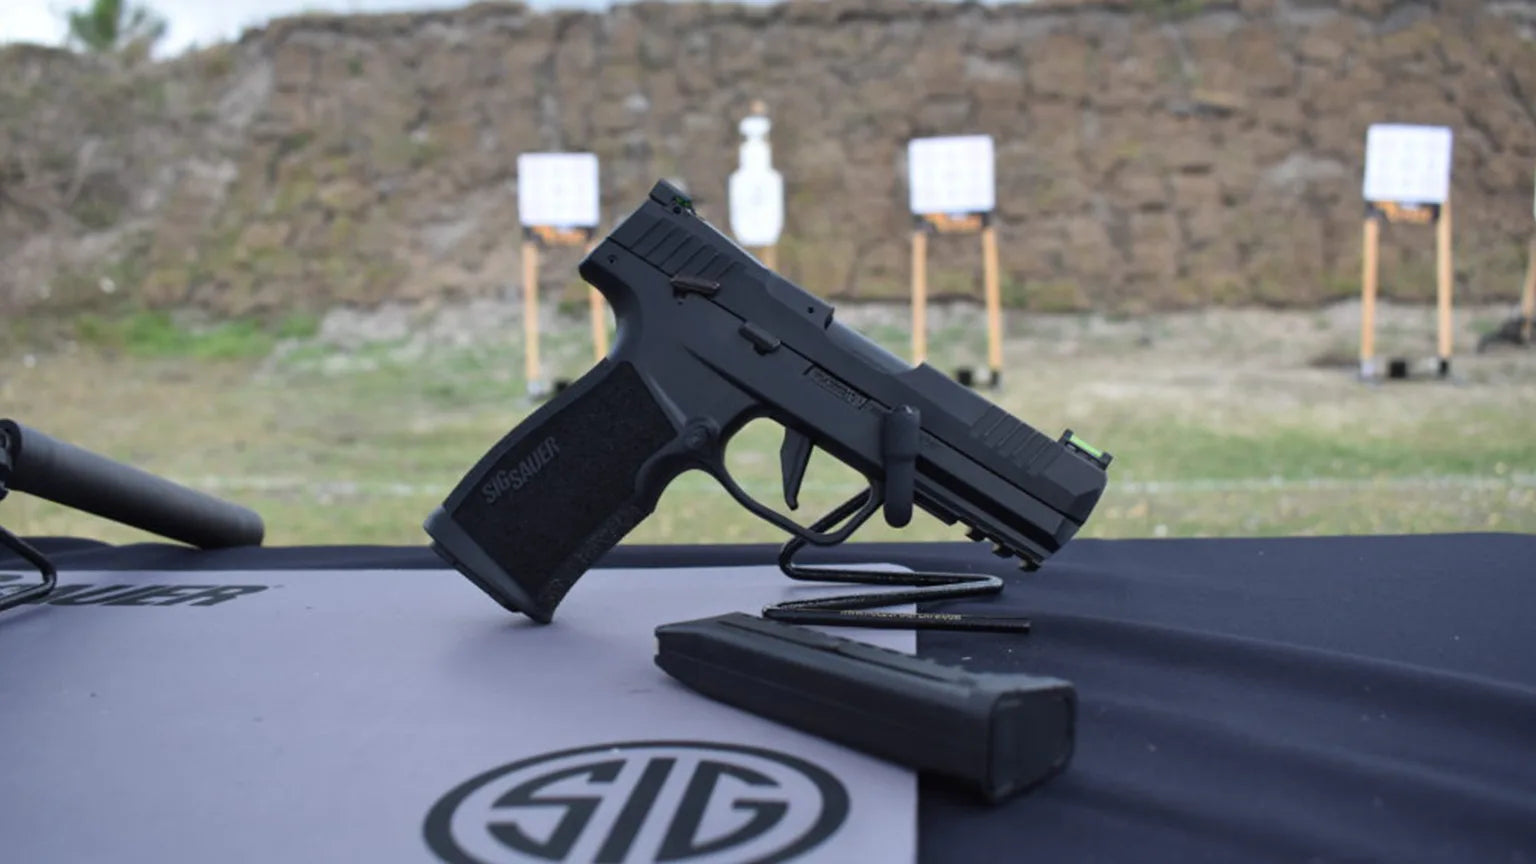 SIG SAUER P322: QUALITY AND FUN AT AN AFFORDABLE PRICE
